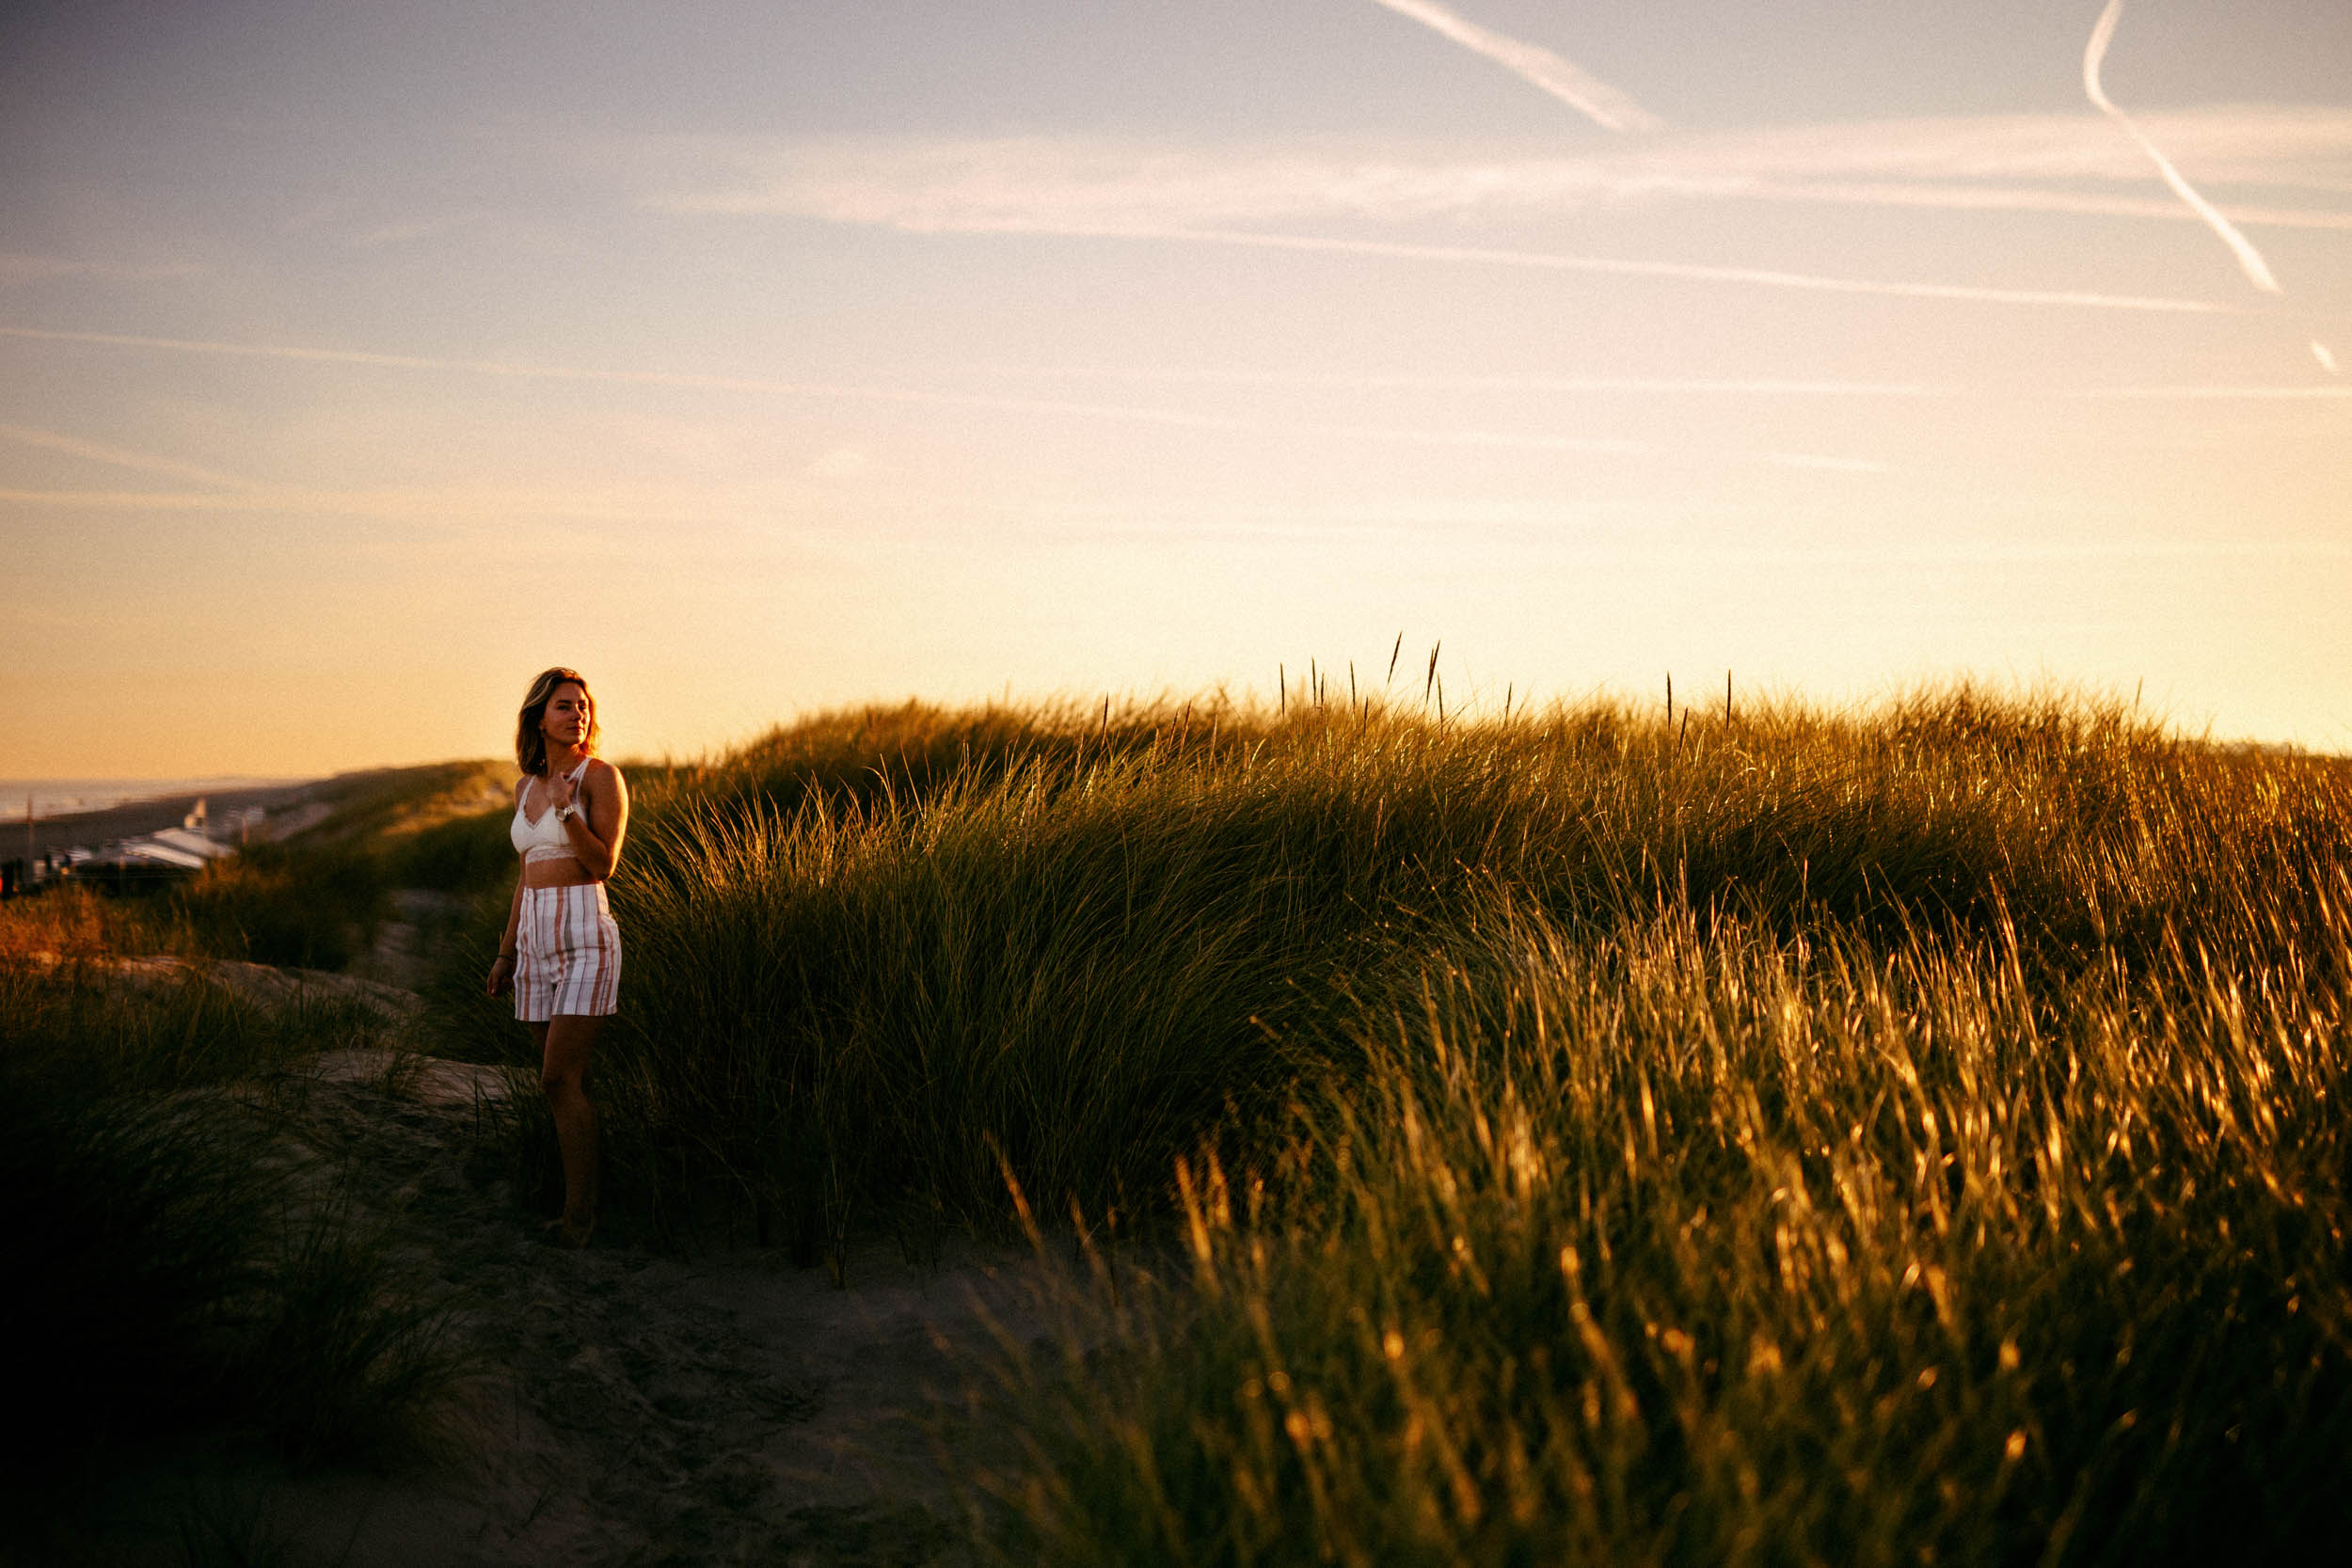 A woman standing in a field of tall grass at sunset, captured in an enchanting "beach photo".